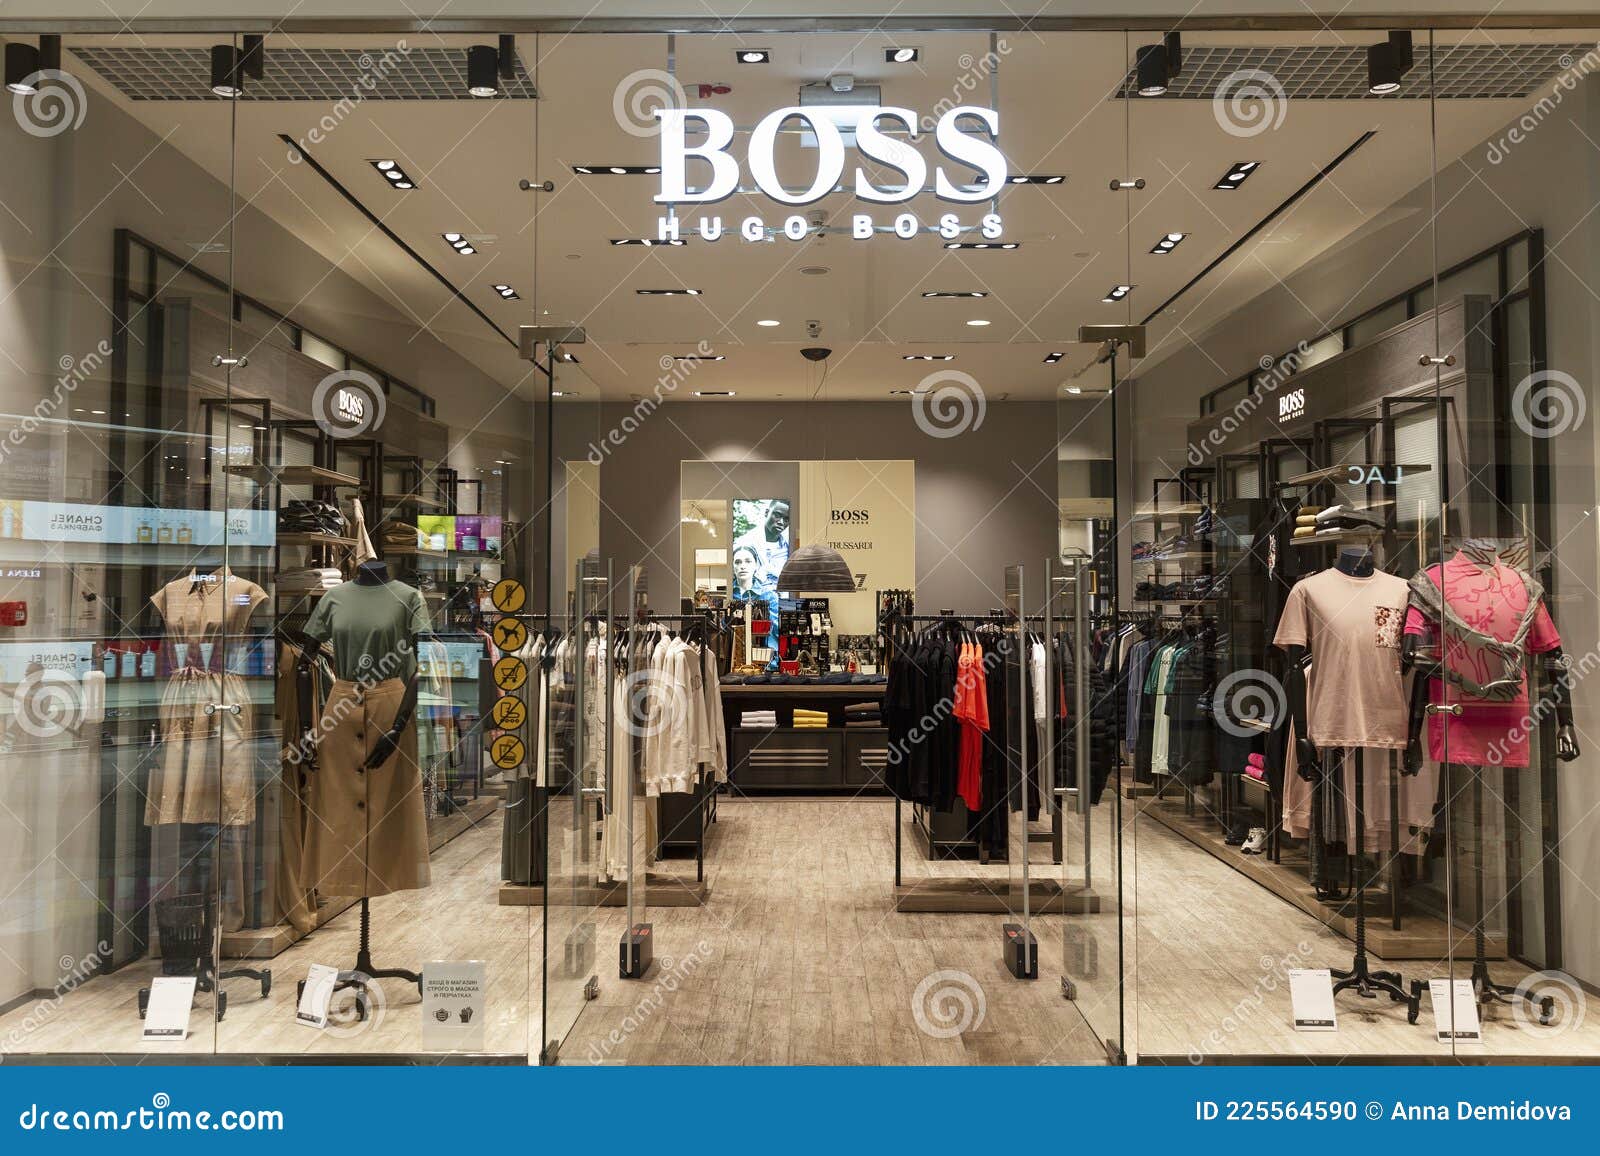 Hugo Boss Shop in the Mall. Front View Editorial Image - Image of ...